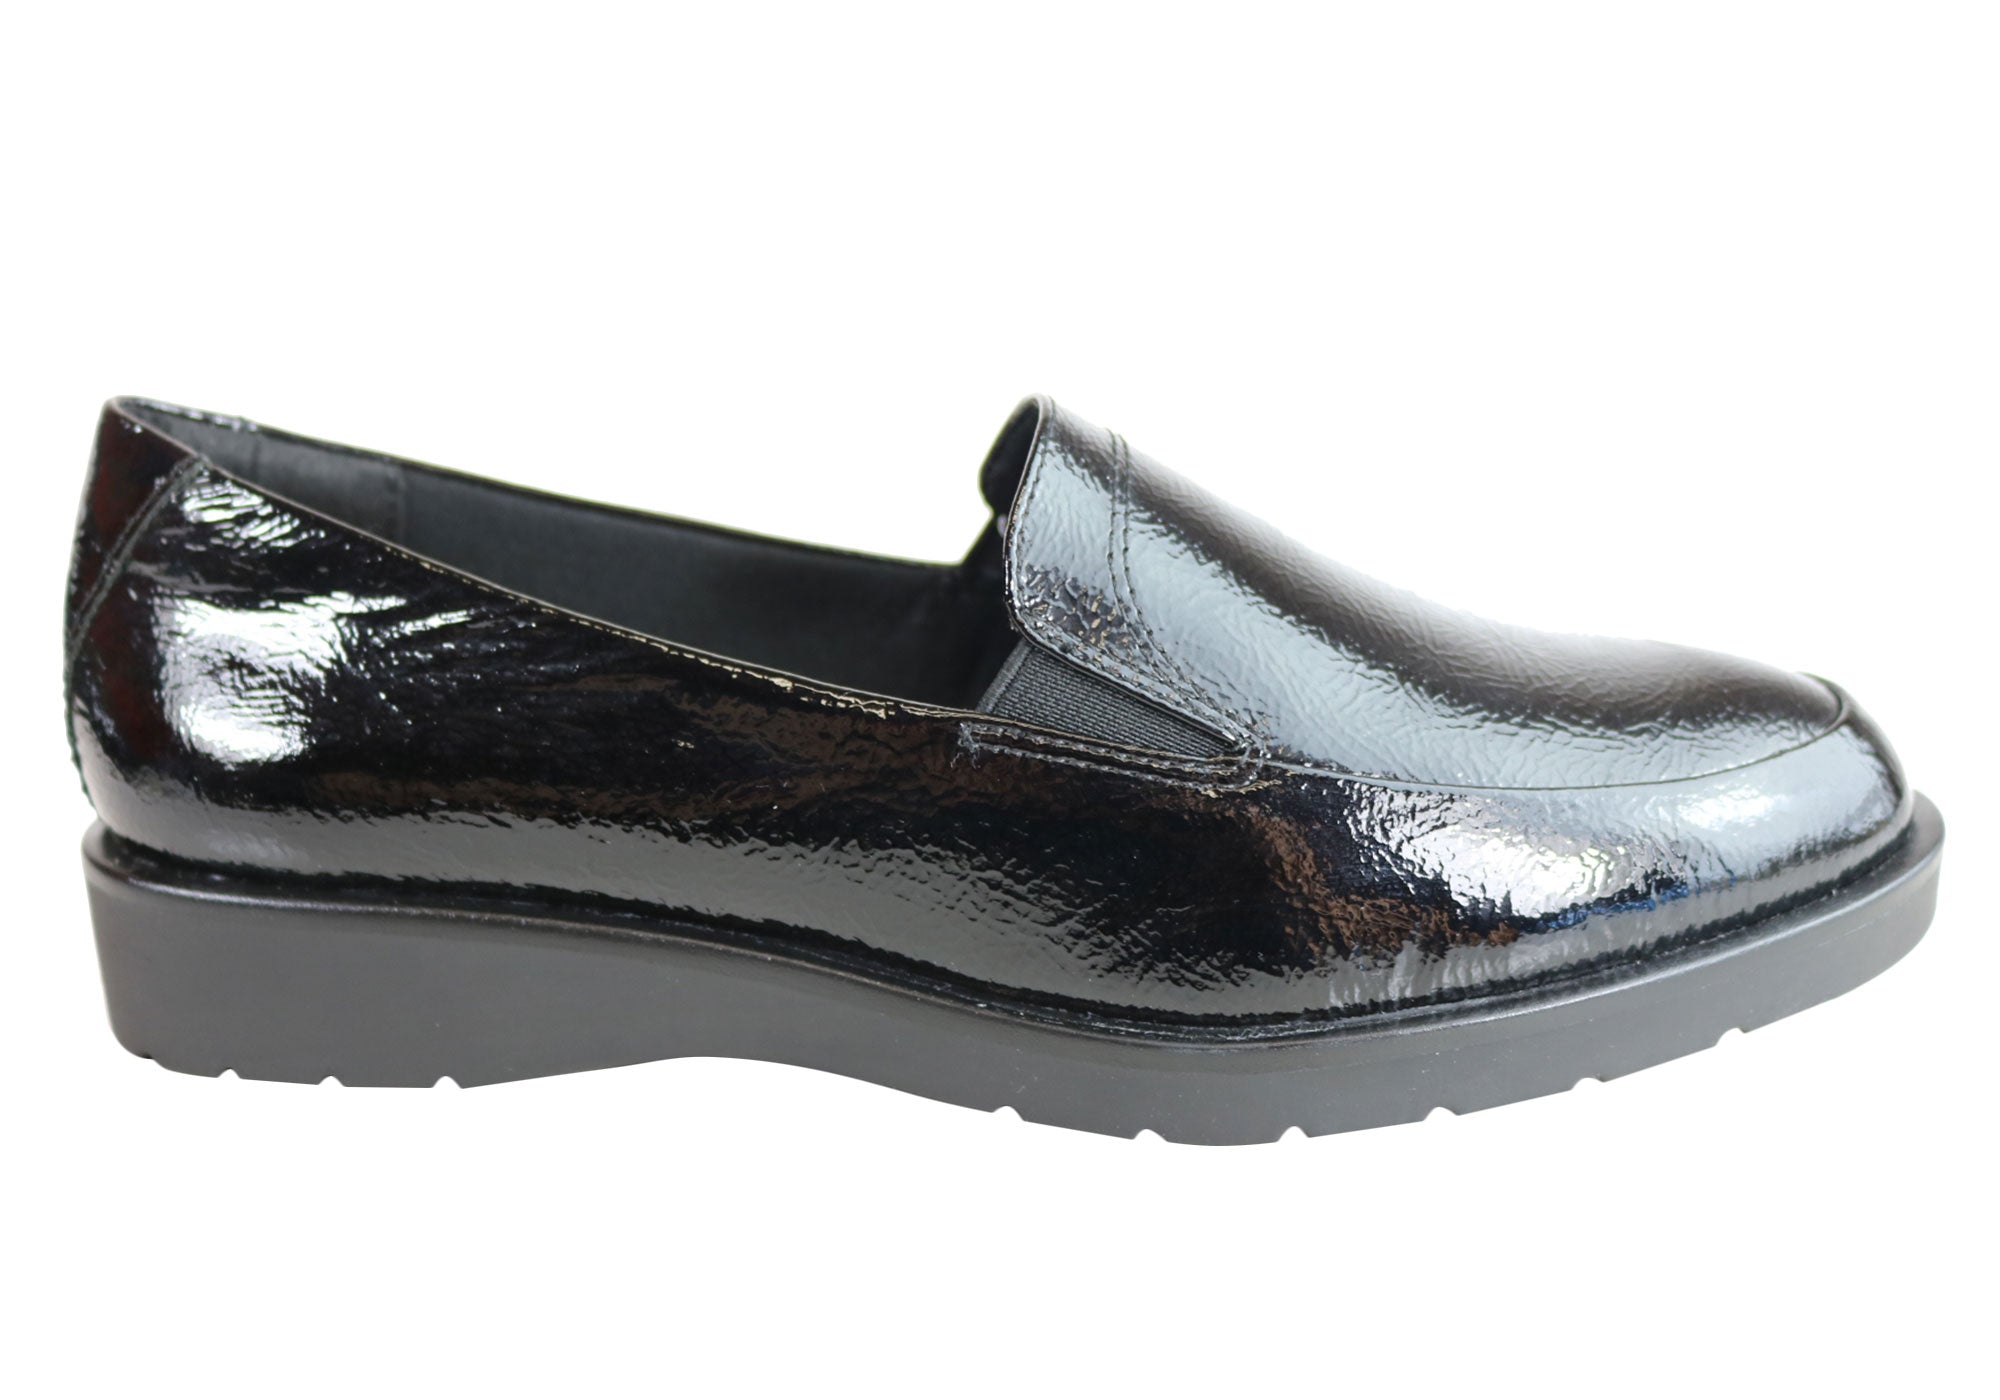 comfortable women's loafers